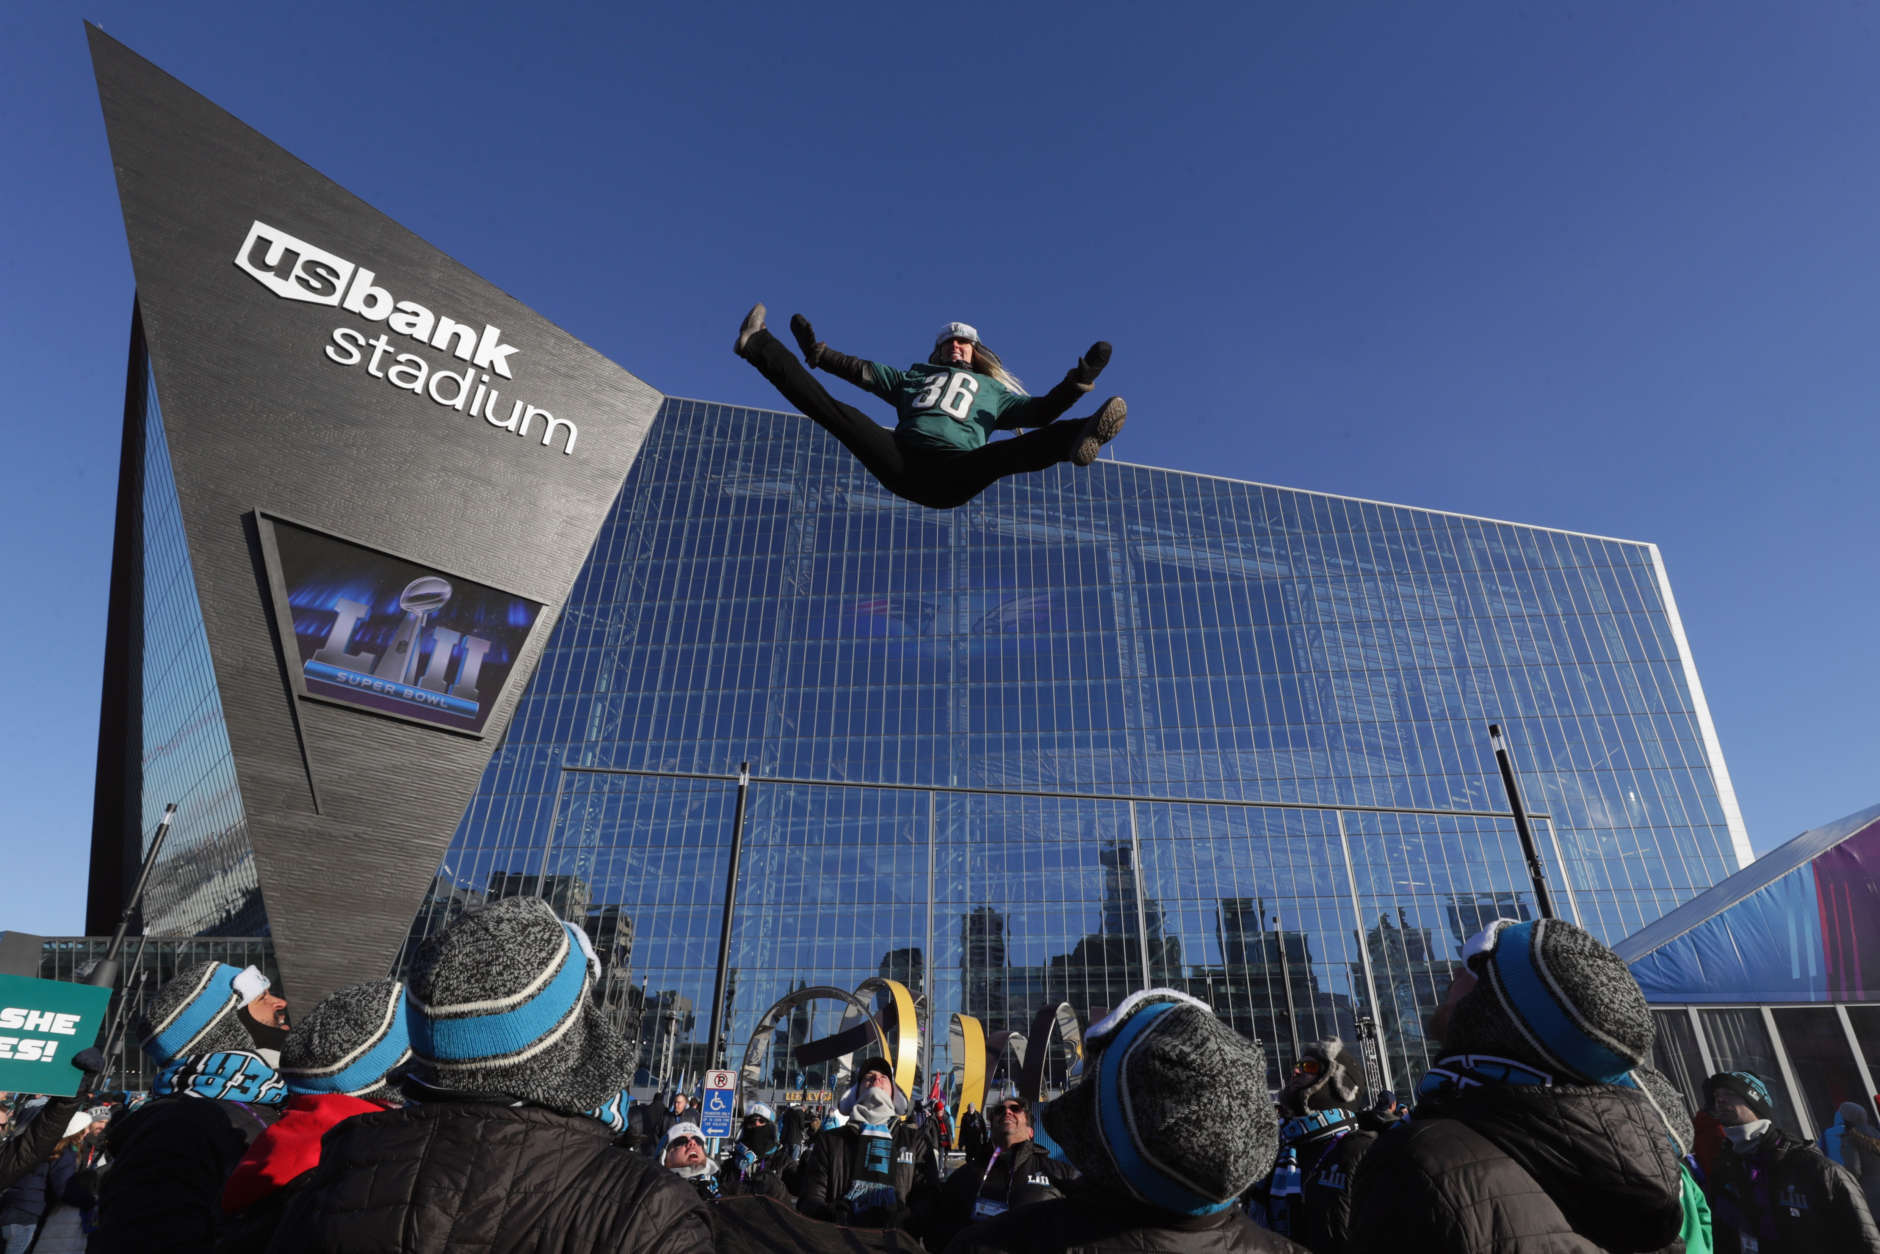 MINNEAPOLIS, MN - FEBRUARY 04:  A fan is thrown in the air outside the stadium prior to Super Bowl LII between the New England Patriots and the Philadelphia Eagles at U.S. Bank Stadium on February 4, 2018 in Minneapolis, Minnesota.  (Photo by Streeter Lecka/Getty Images)